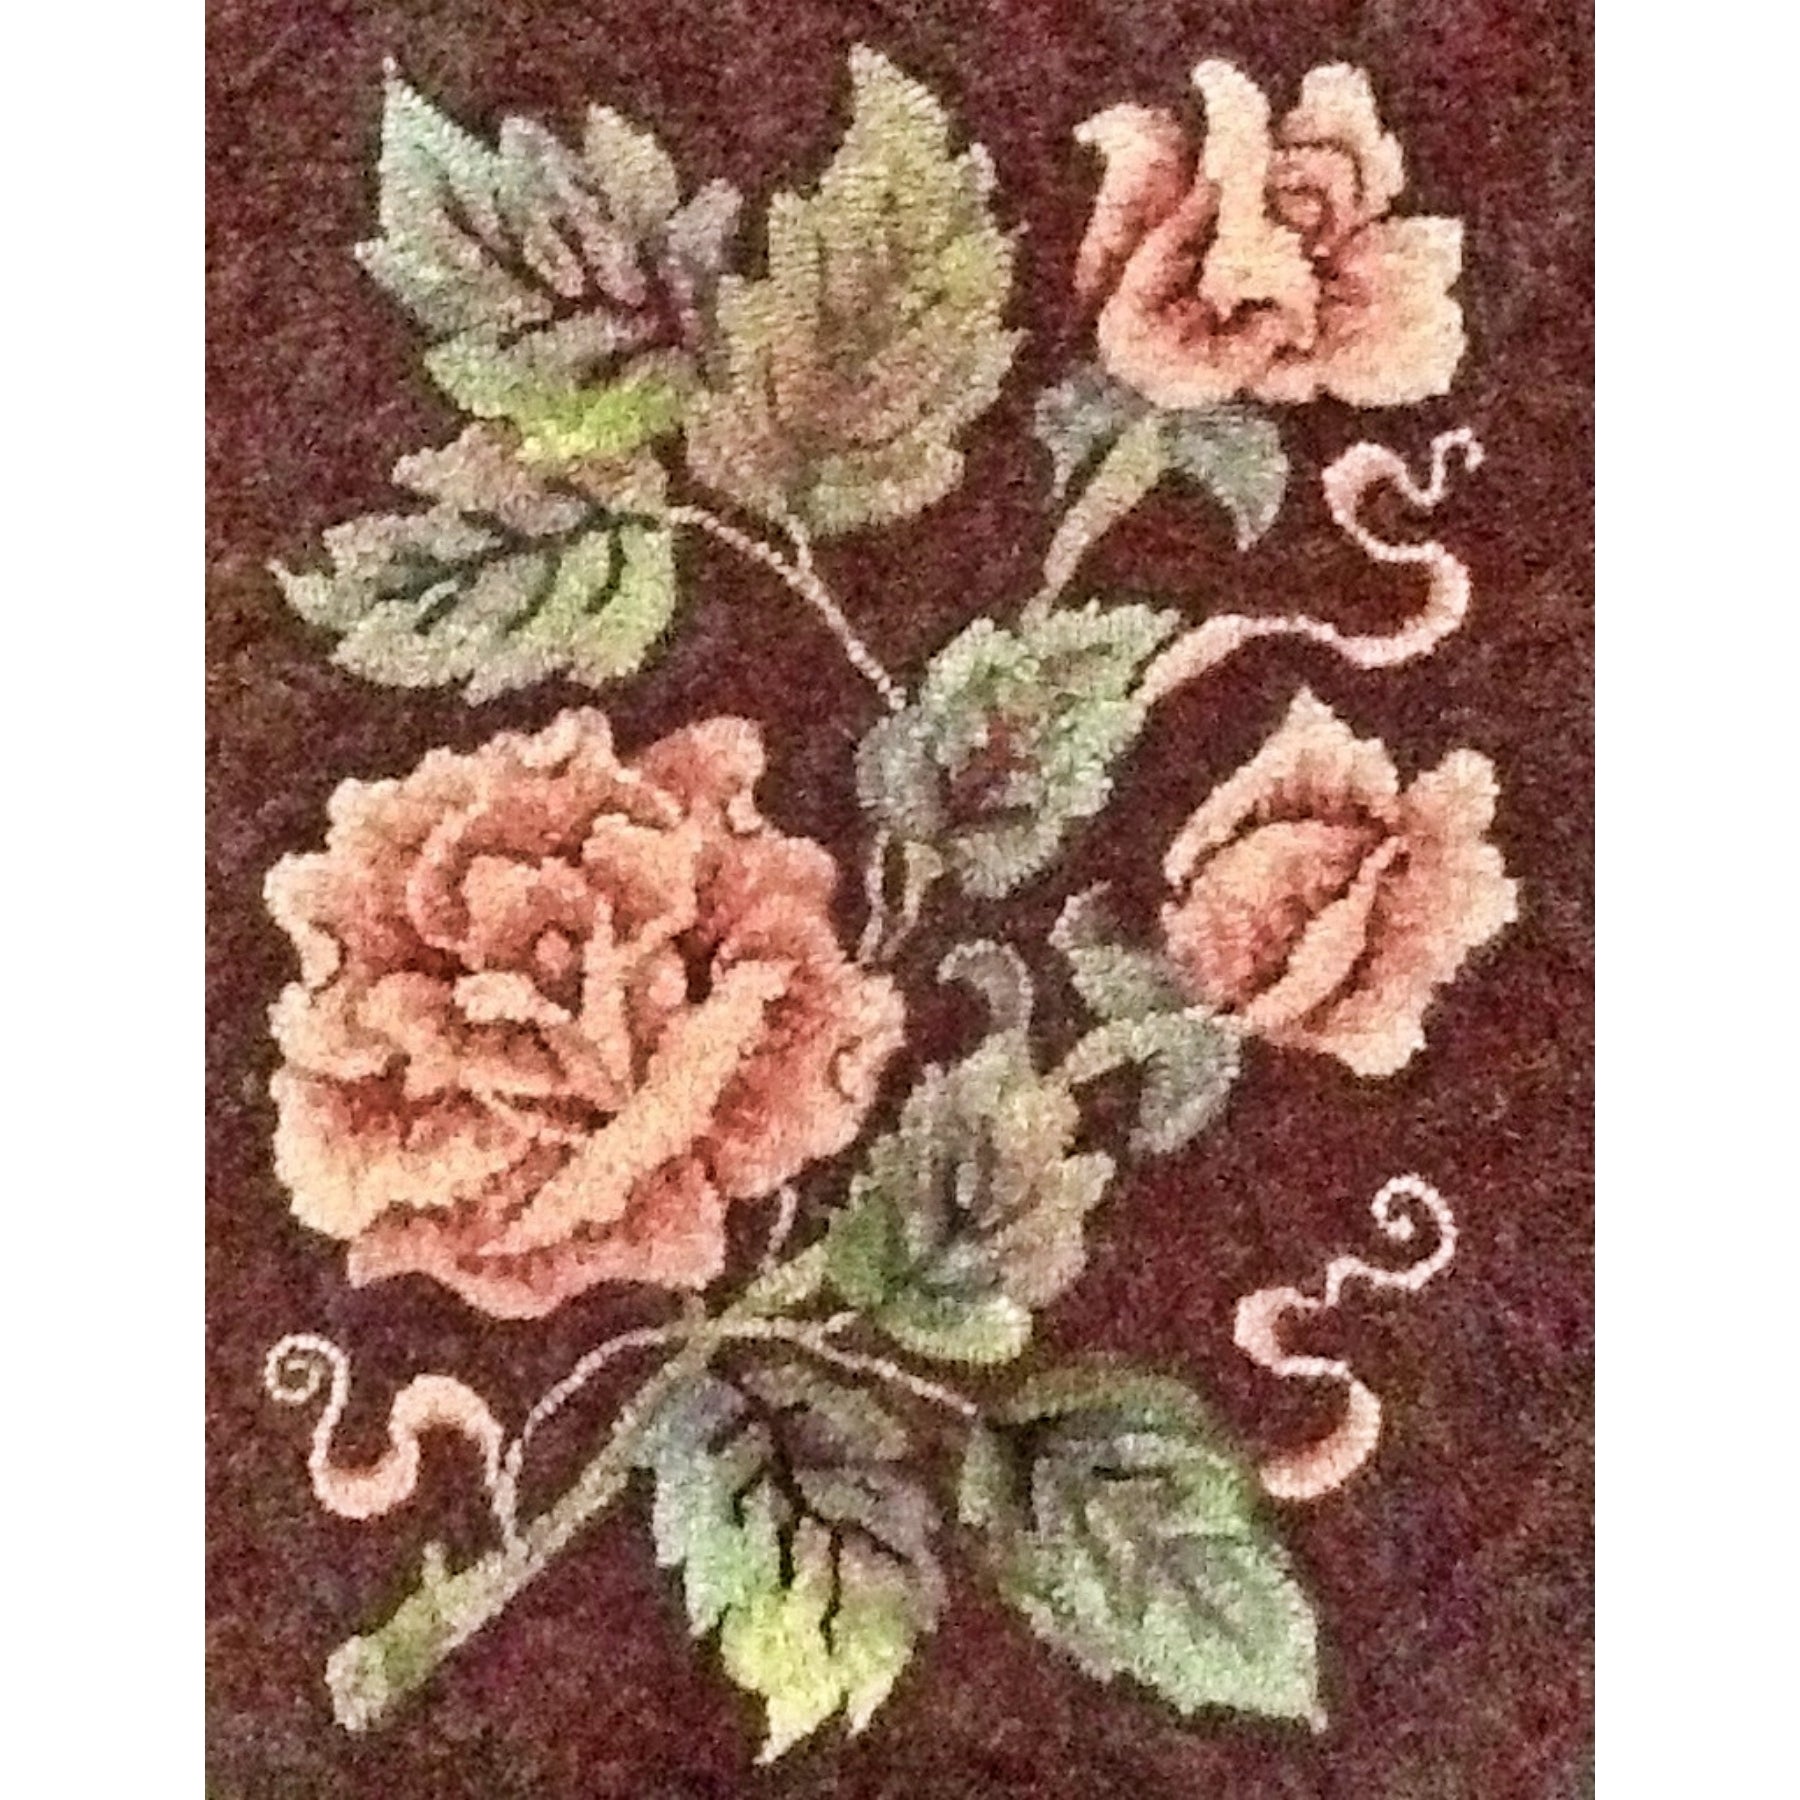 Roses, rug hooked by Sherry Chandler